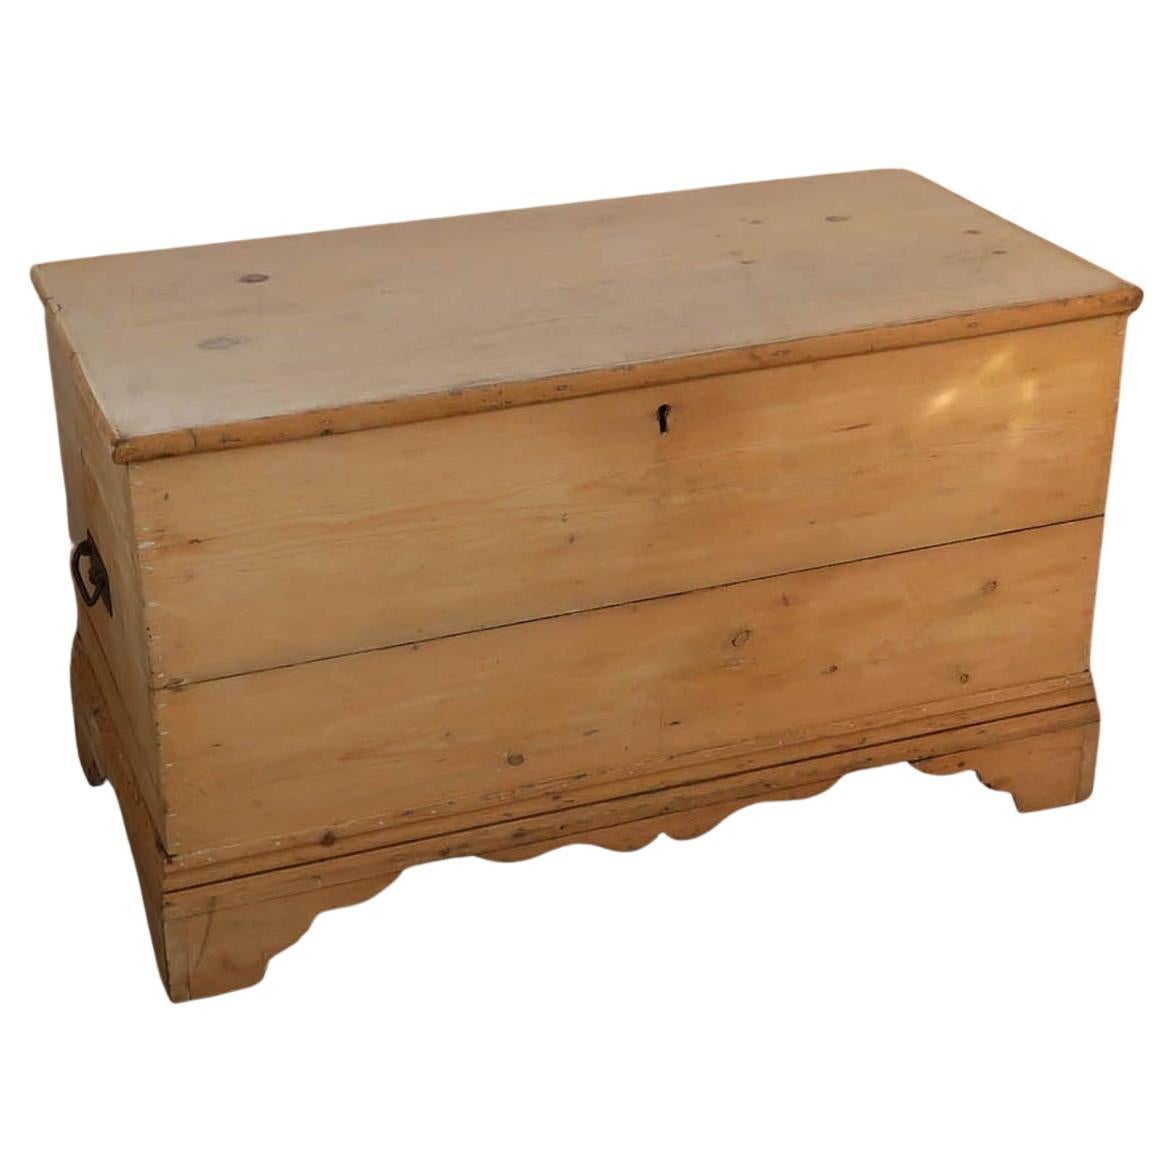 Delightful pine chest.

Makes a great coffee table

Wonderful simplicity and great colors.

I particularly like the original bracket feet.

Original paint to the interior

Replaced hinges. Original handles

The lock is missing. 

Restoration to both